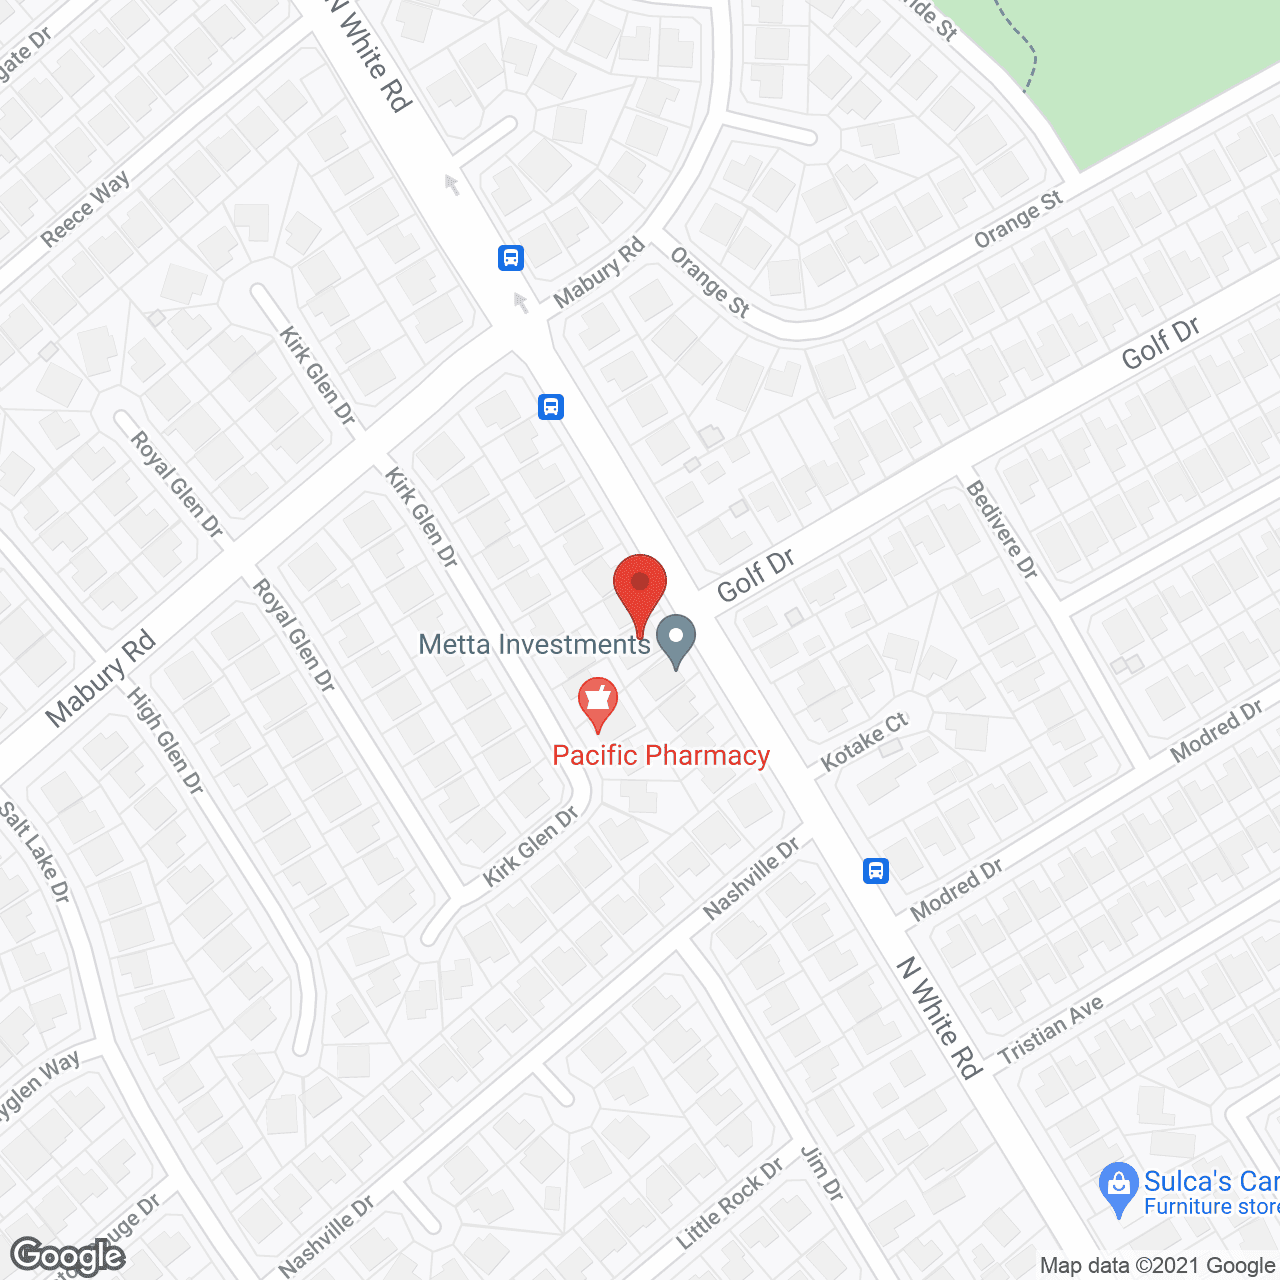 Lifeshare Care Home Inc. in google map